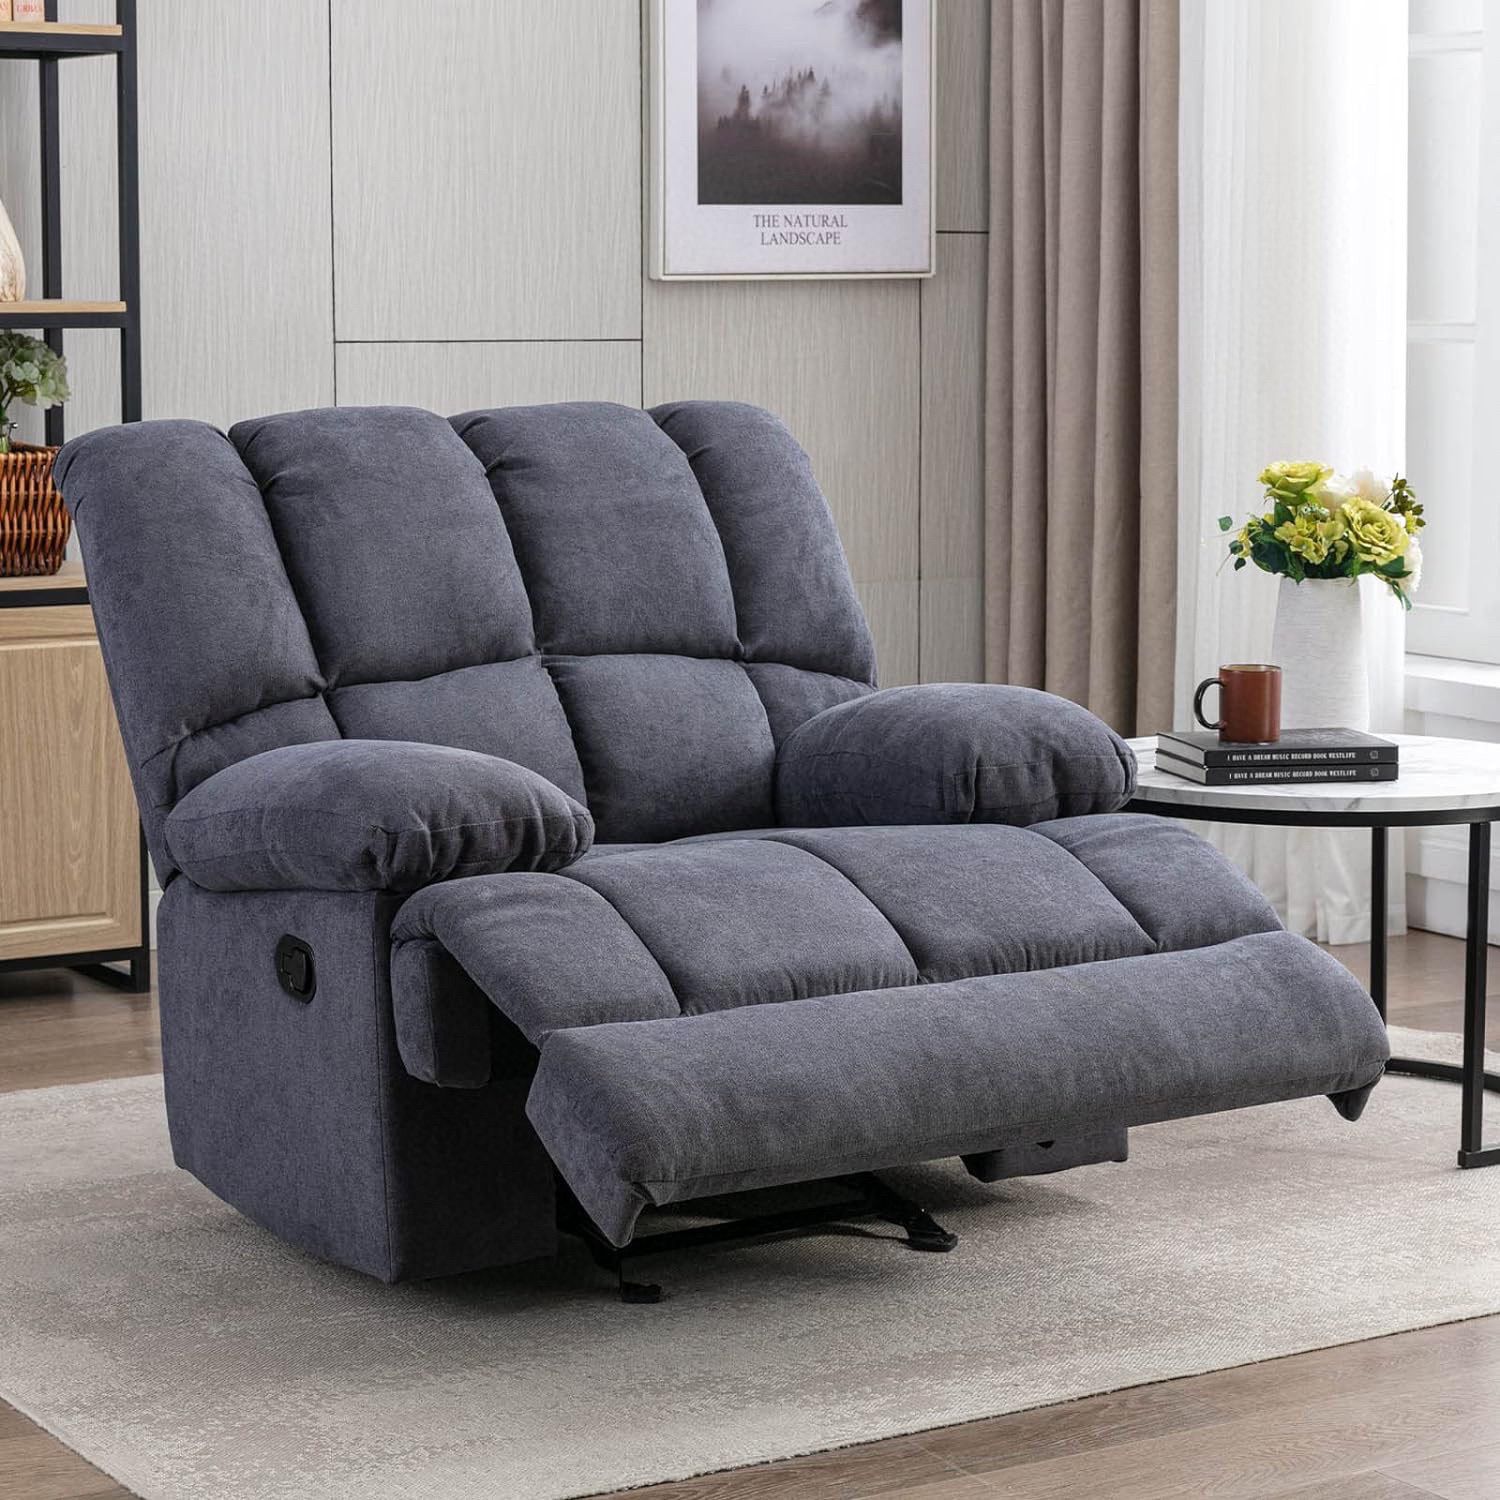 Set of 2 Oversized Rocker Recliner Chair, Manual Recliner Single Sofa Couch, Soft Fabric Overstuffed Rocking Chair